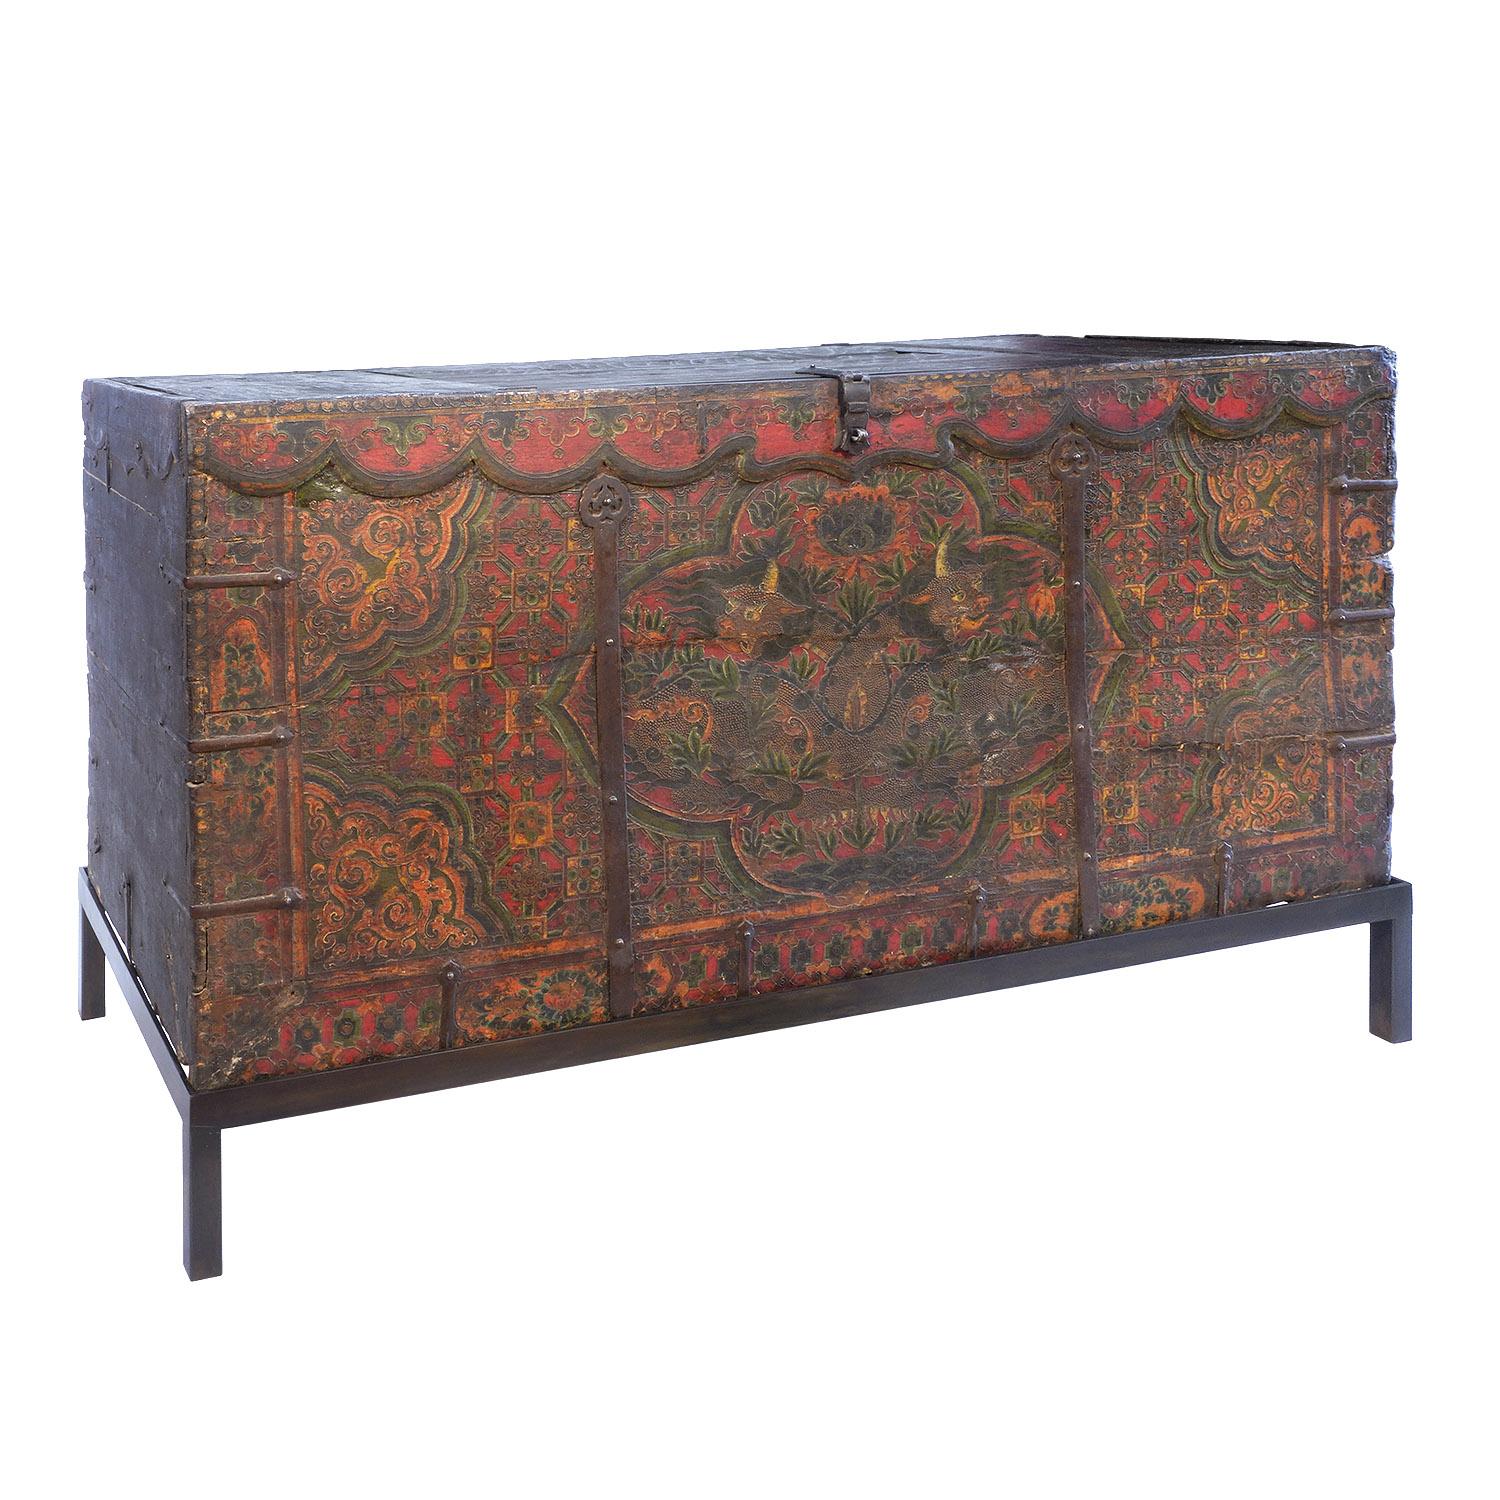 Large Tibetan storage chest with traditional hand painted Dragons

Tibet

Wood, Iron, Paint

19th century.

27 x 59.5 x 22.5 in./ 69 x 151 x 57

Height on custom display Stand: 34.75 in./ 88 cm

It's in worn condition. Losses and cracks